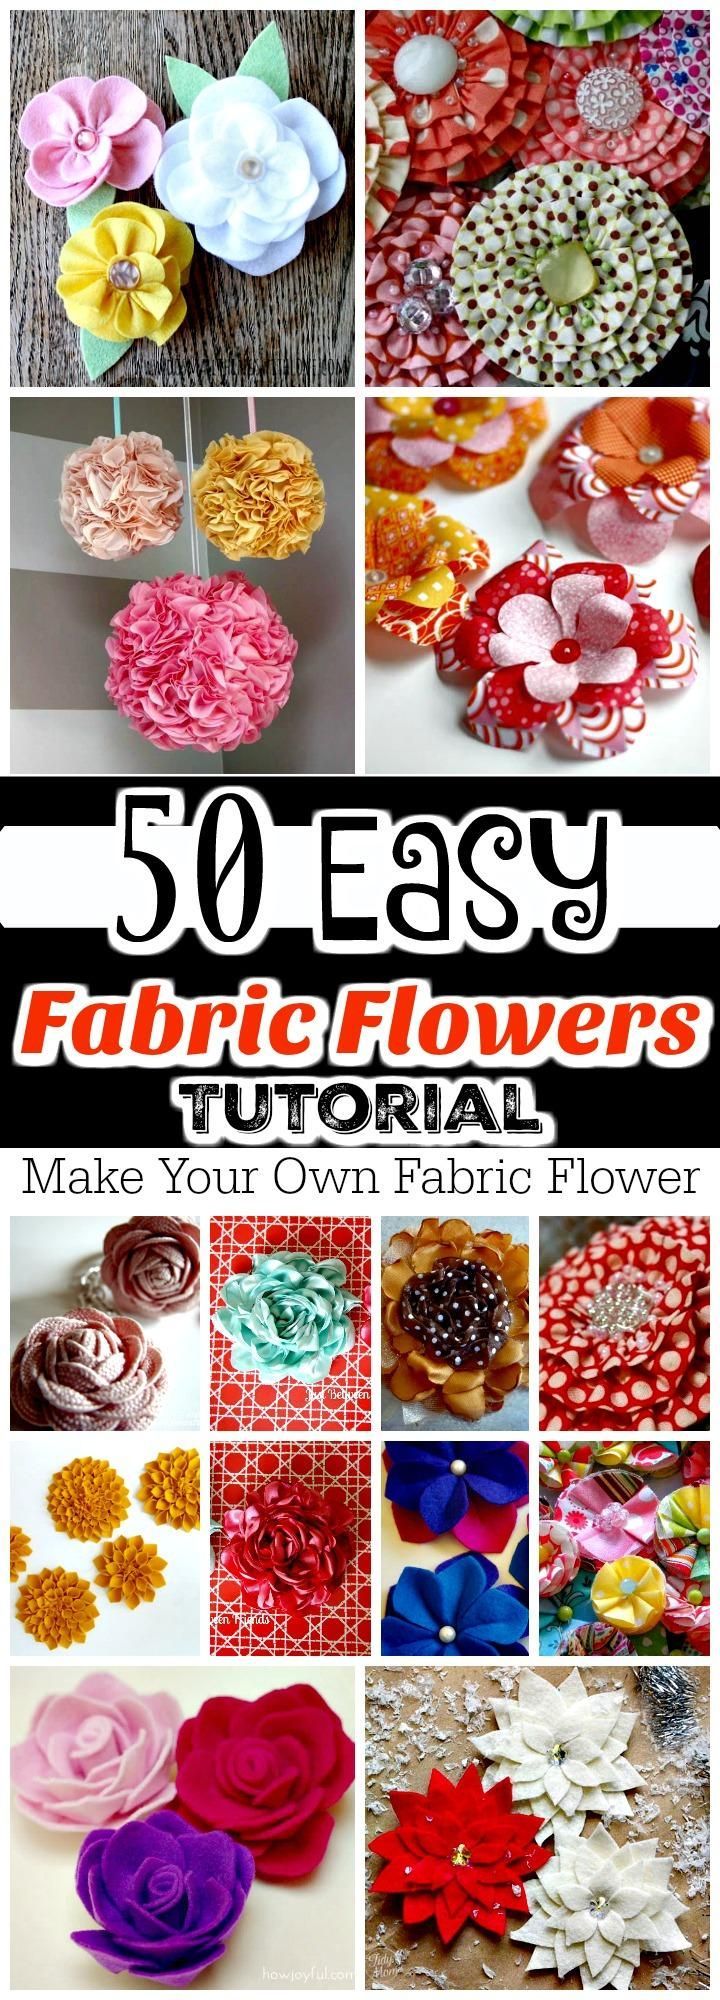 50 Easy Fabric Flowers Tutorial - Make Your Own Fabric Flowers -   25 fabric crafts clothes
 ideas